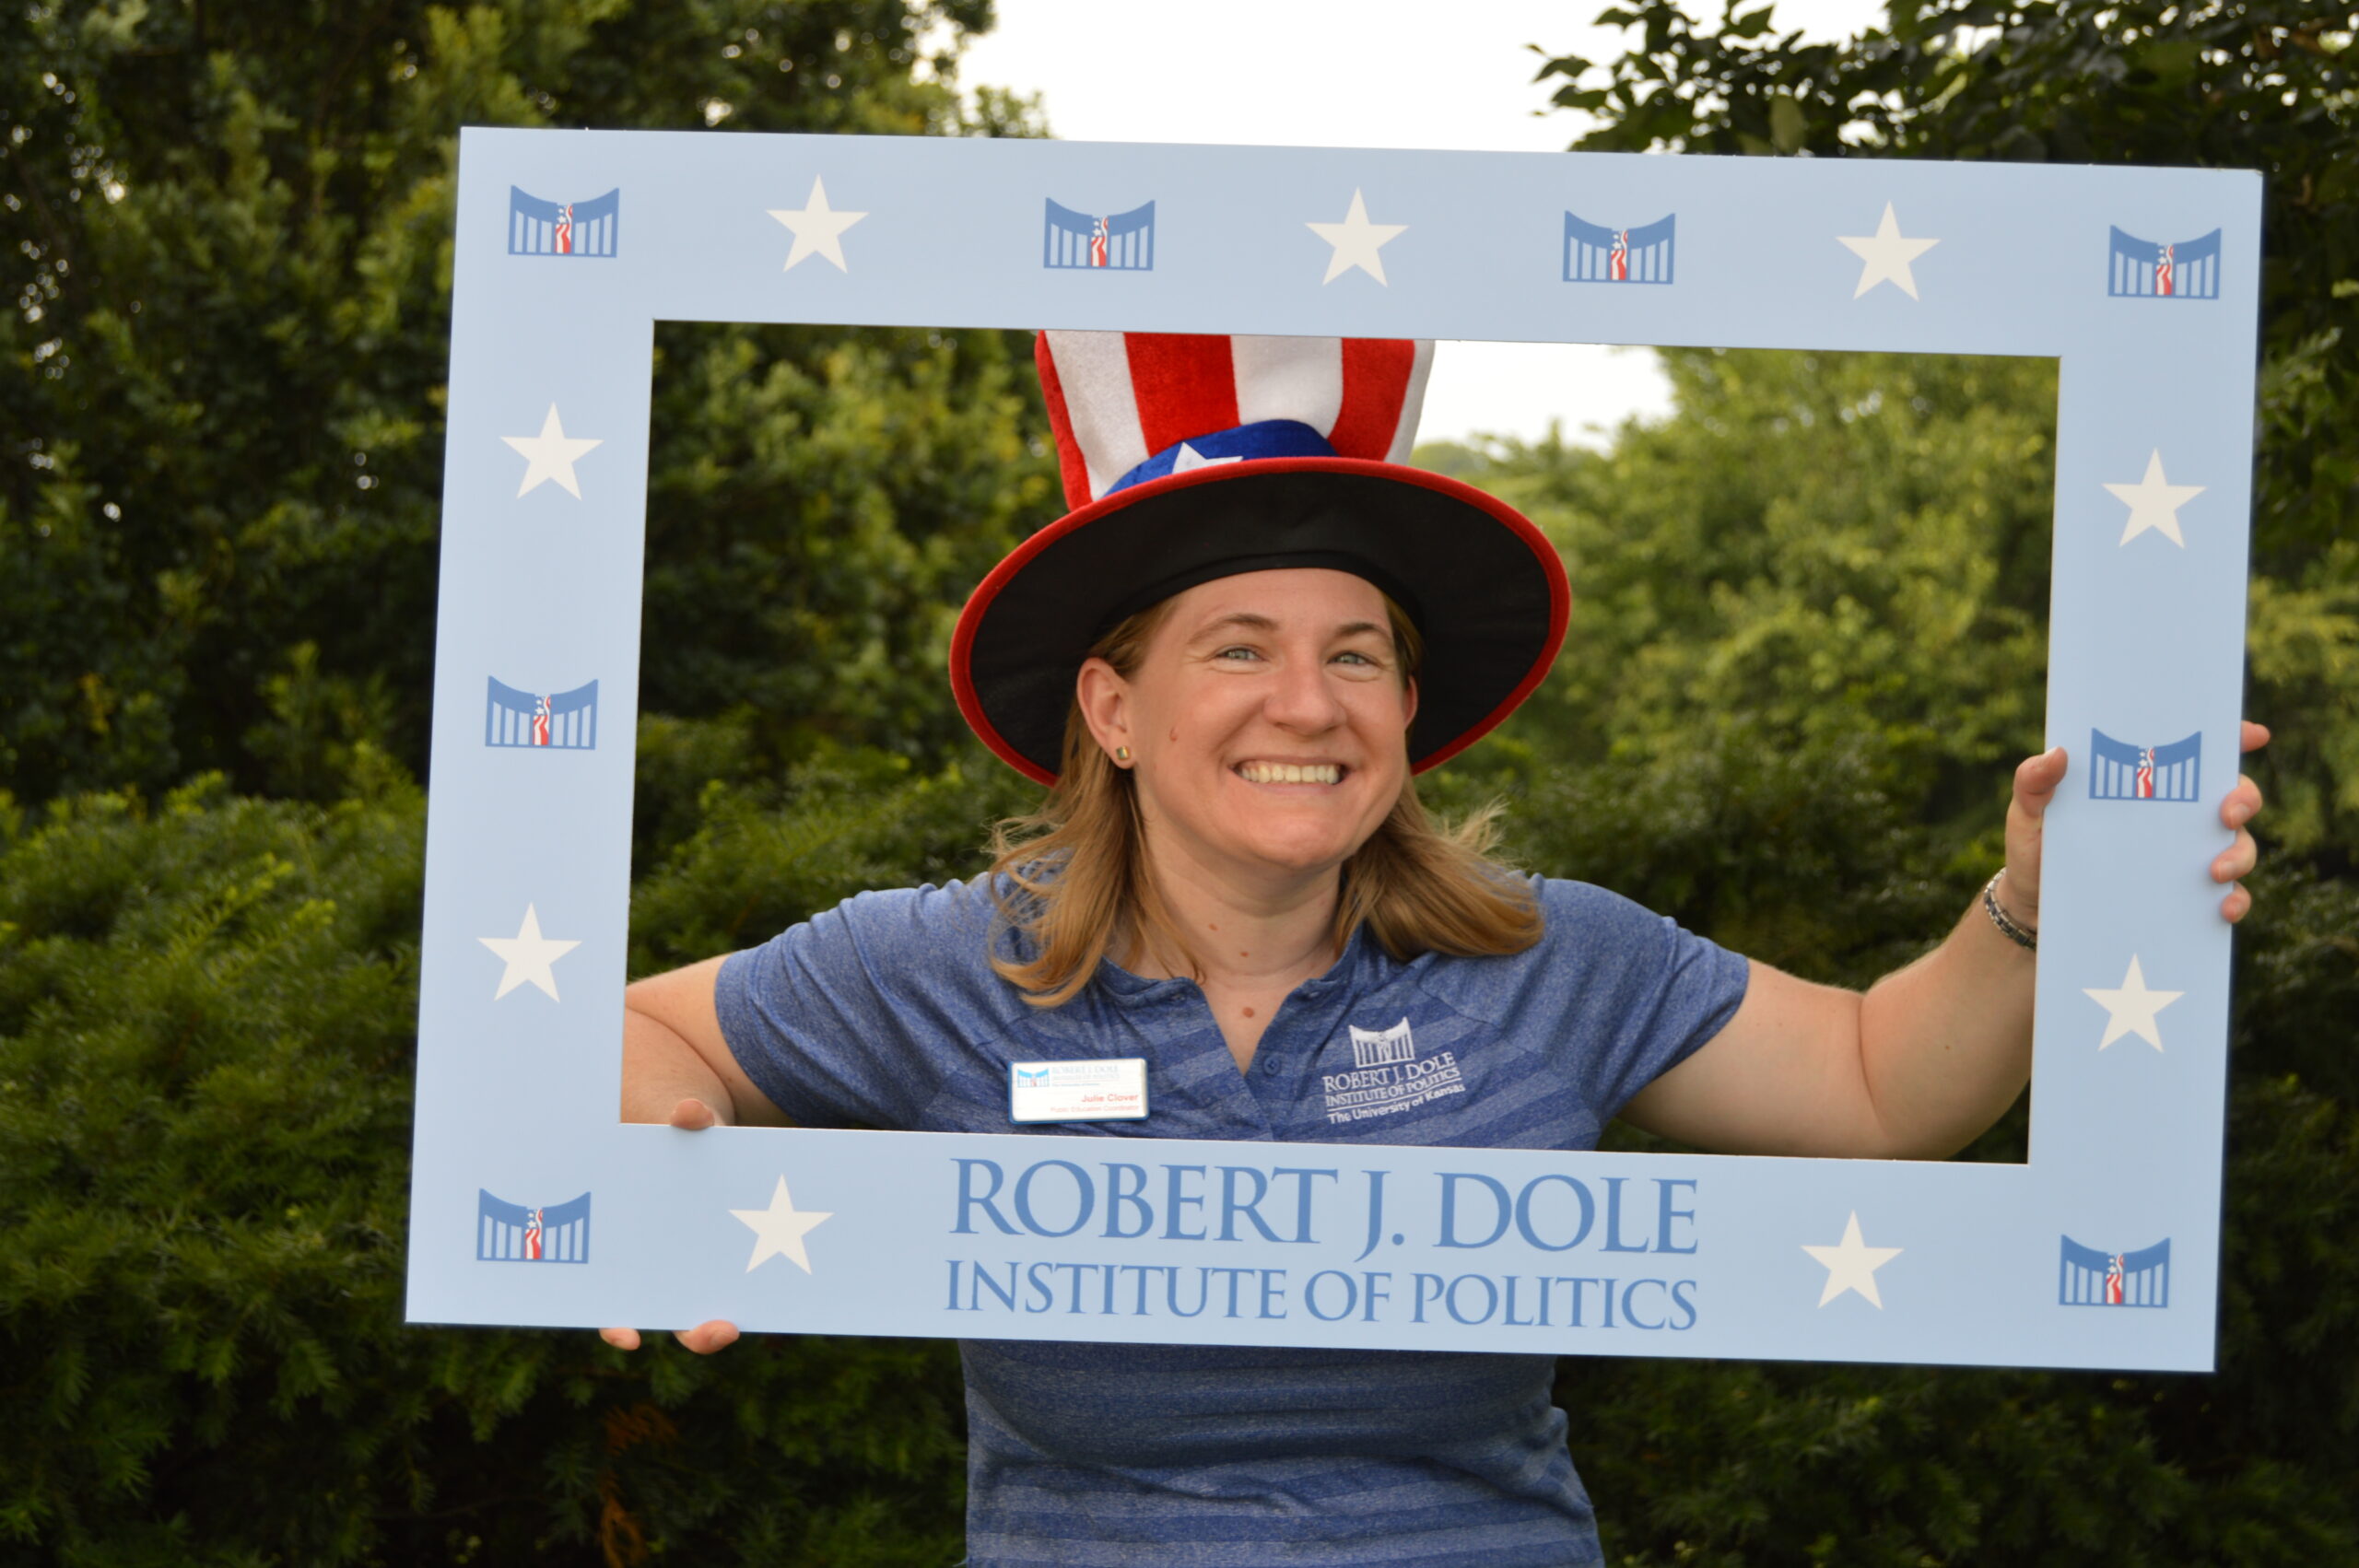 Julie Clover with an uncle sam hat, holding a frame around her face that reads 'Robert J. Dole Institute of Politics'